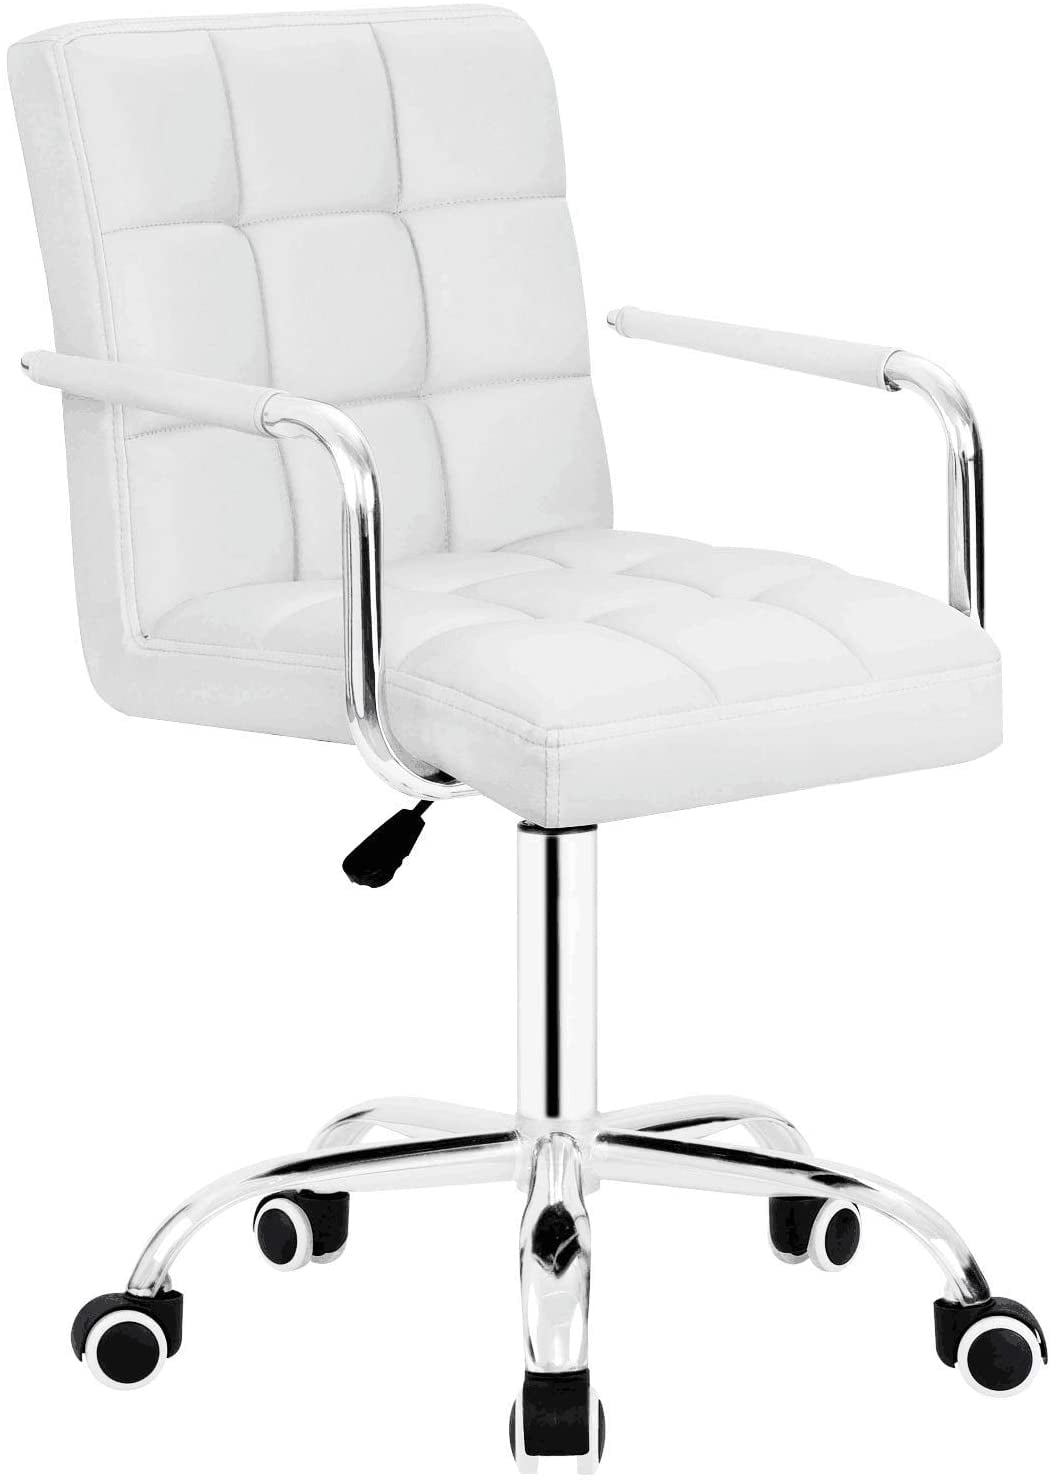 Office Mid-Back Desk Chair Height Adjustable PU Leather Swivel Task Chair 